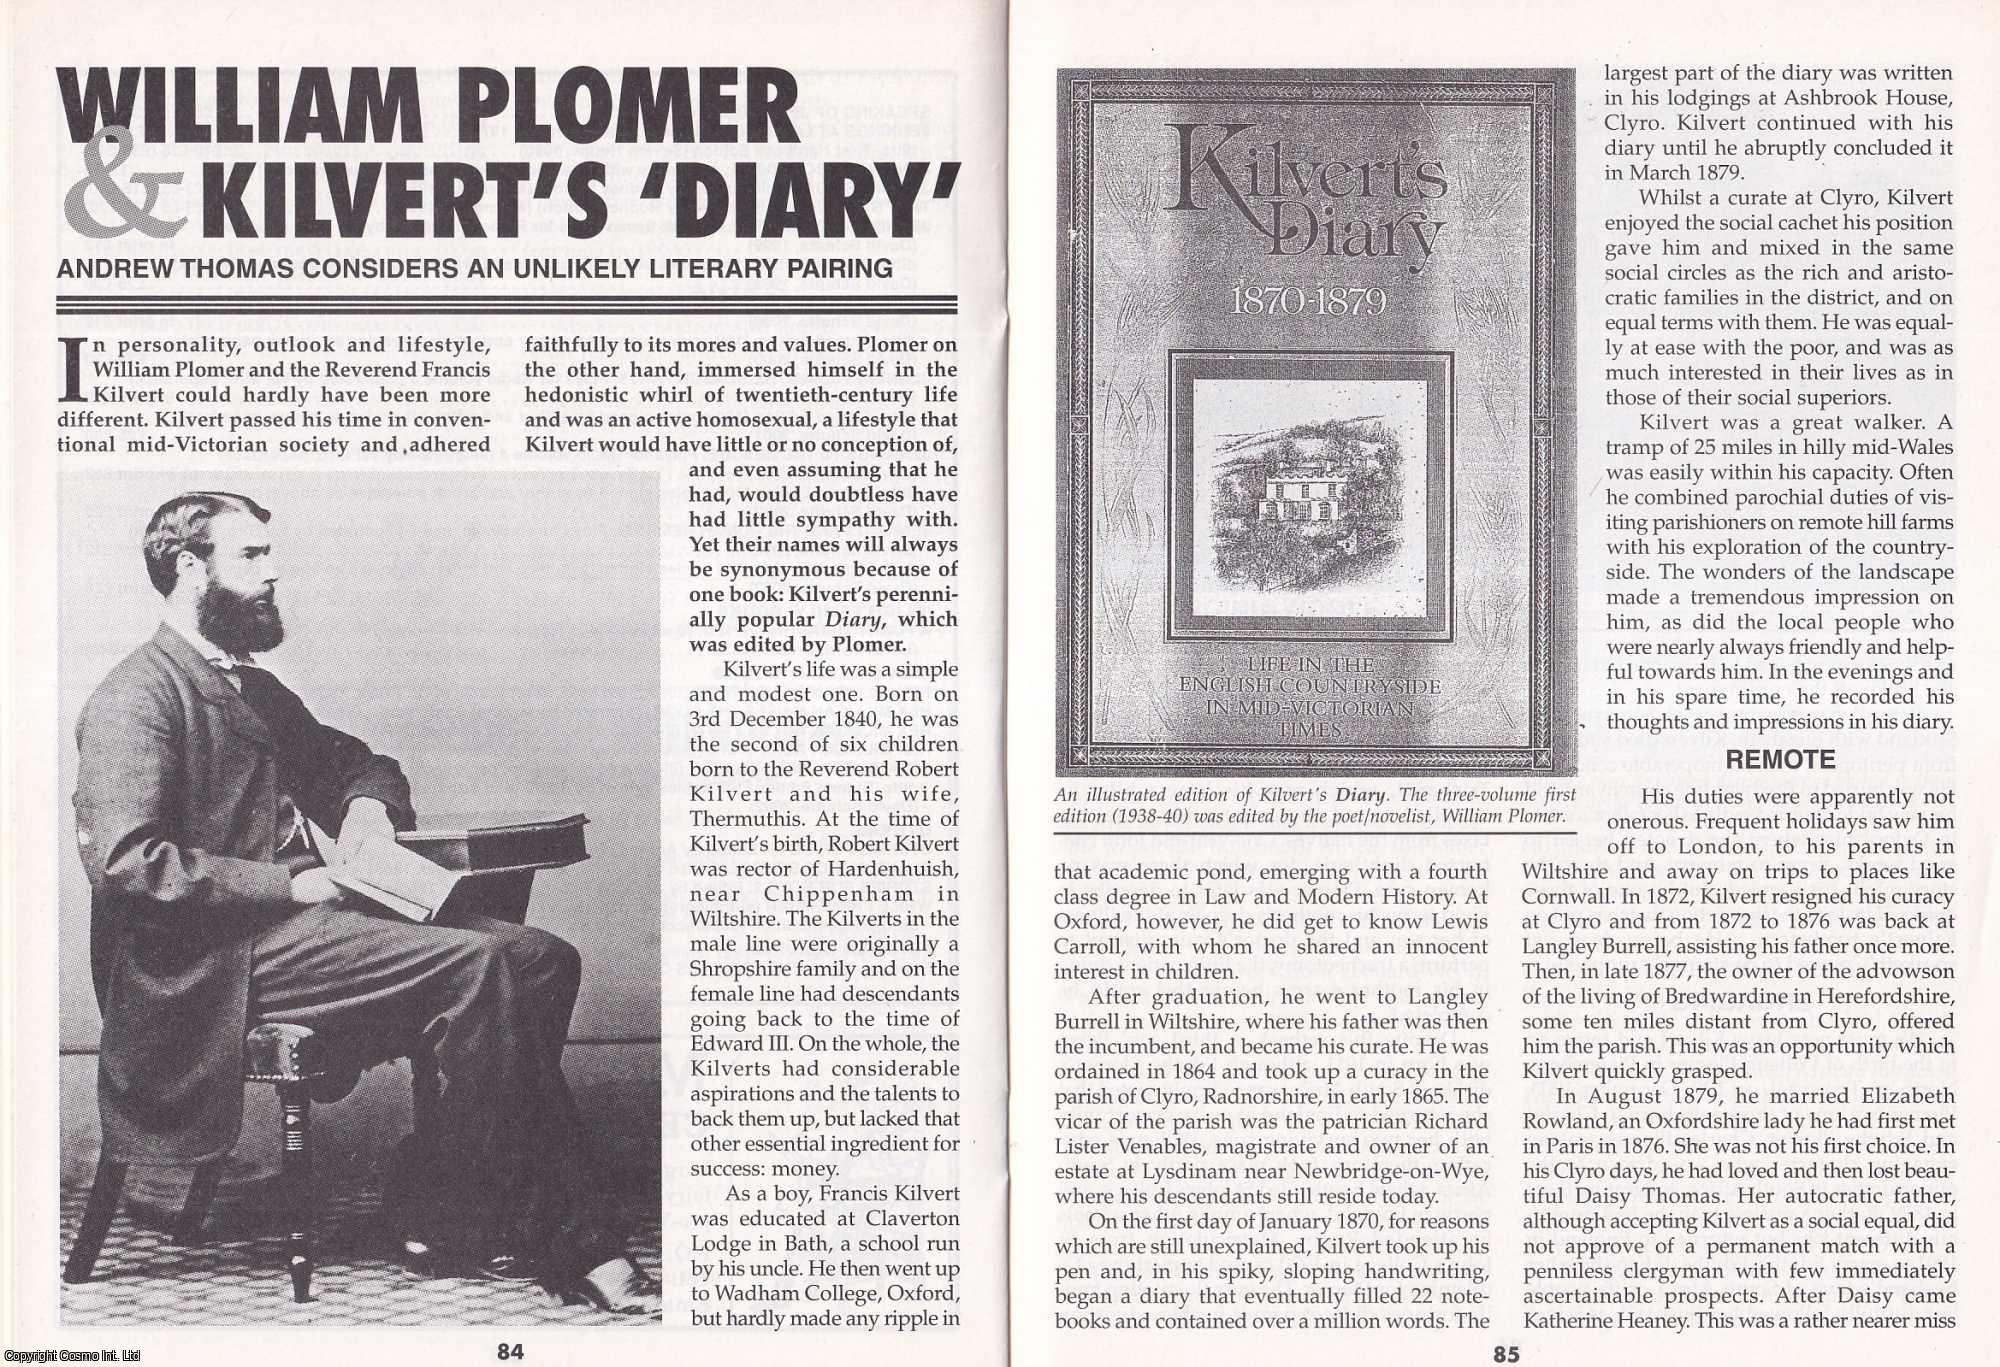 Andrew Thomas - William Plomer & Reverend Francis Kilvert's Diary. This is an original article separated from an issue of The Book & Magazine Collector publication, 2002.